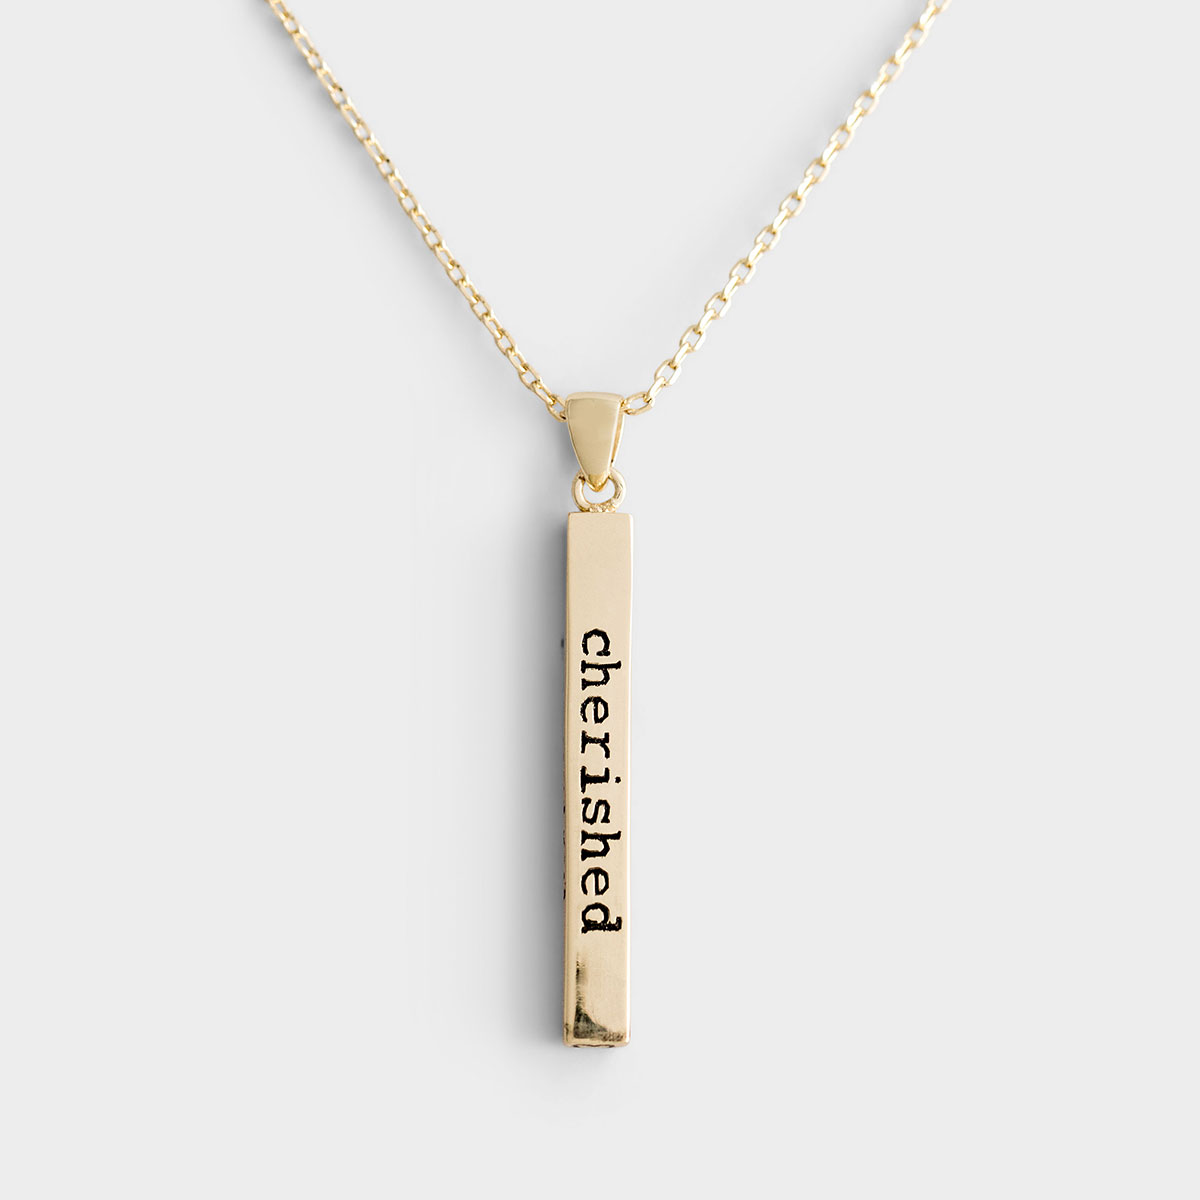 This lovely, sterling silver inspirational charm necklace features a pendant with the engraved words created, chosen, celebrated, and cherished. A wonderful reminder of who God created us to be.